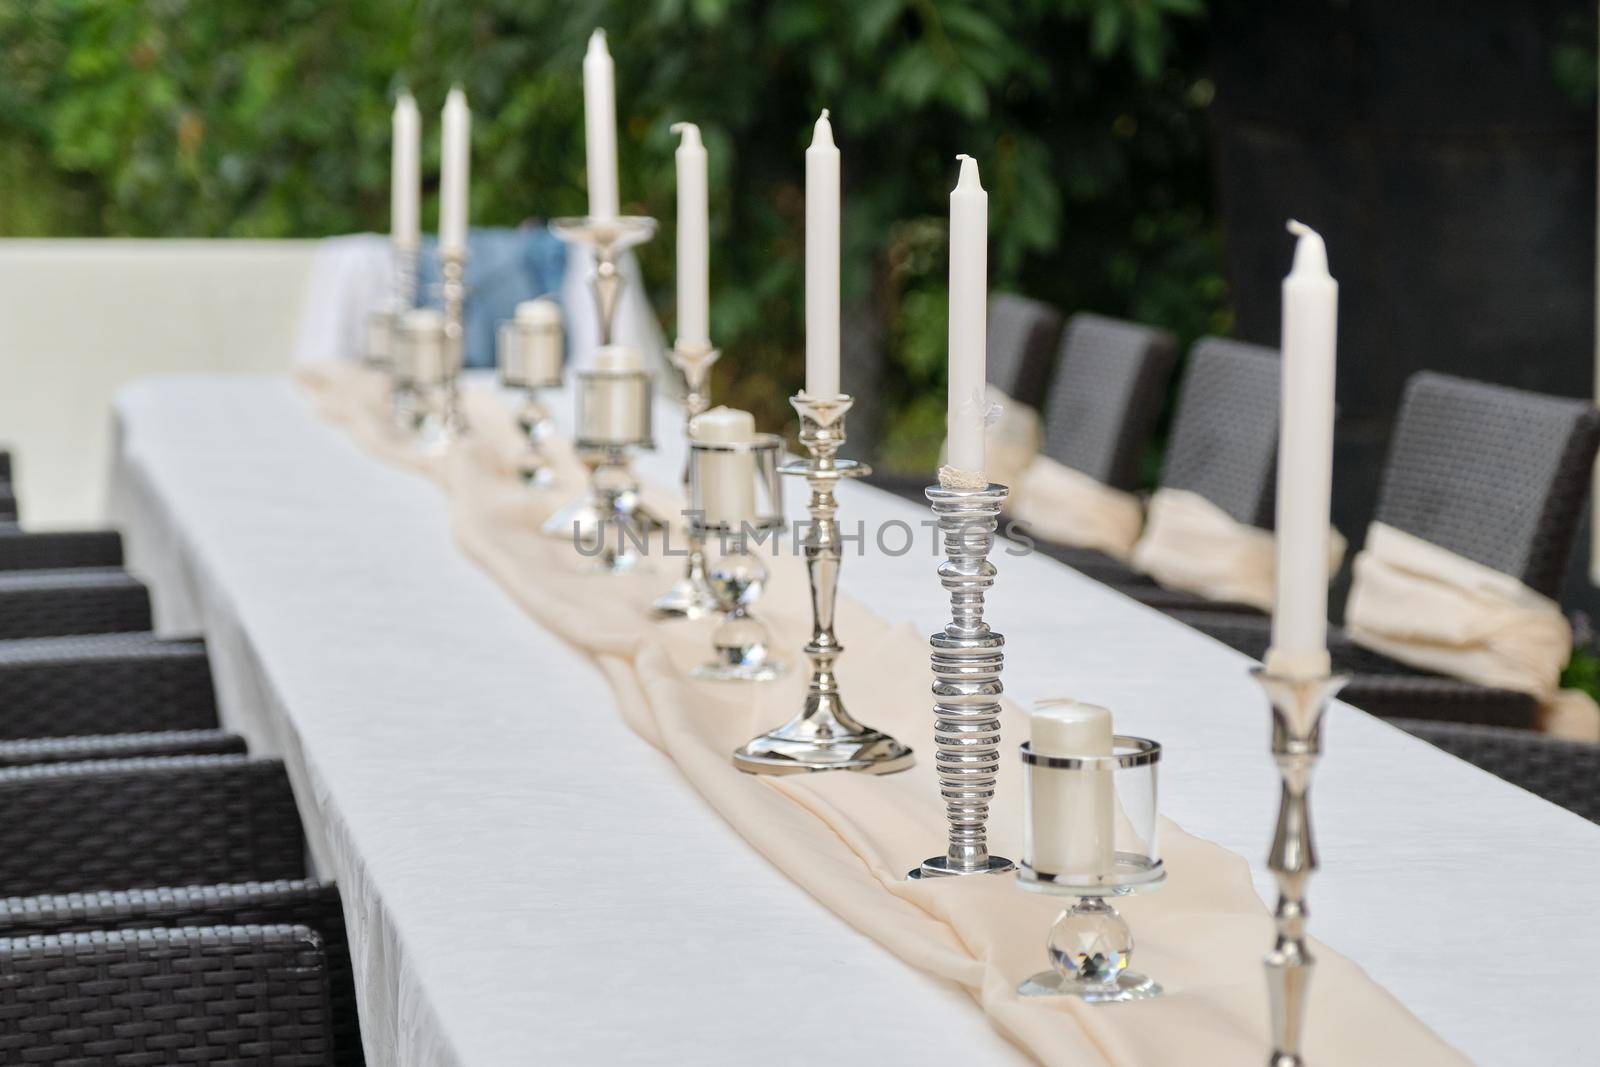 Decoration of events, close-ups of decor details, beginning of table setting. Table with white tablecloth and candlesticks in the outdoor garden